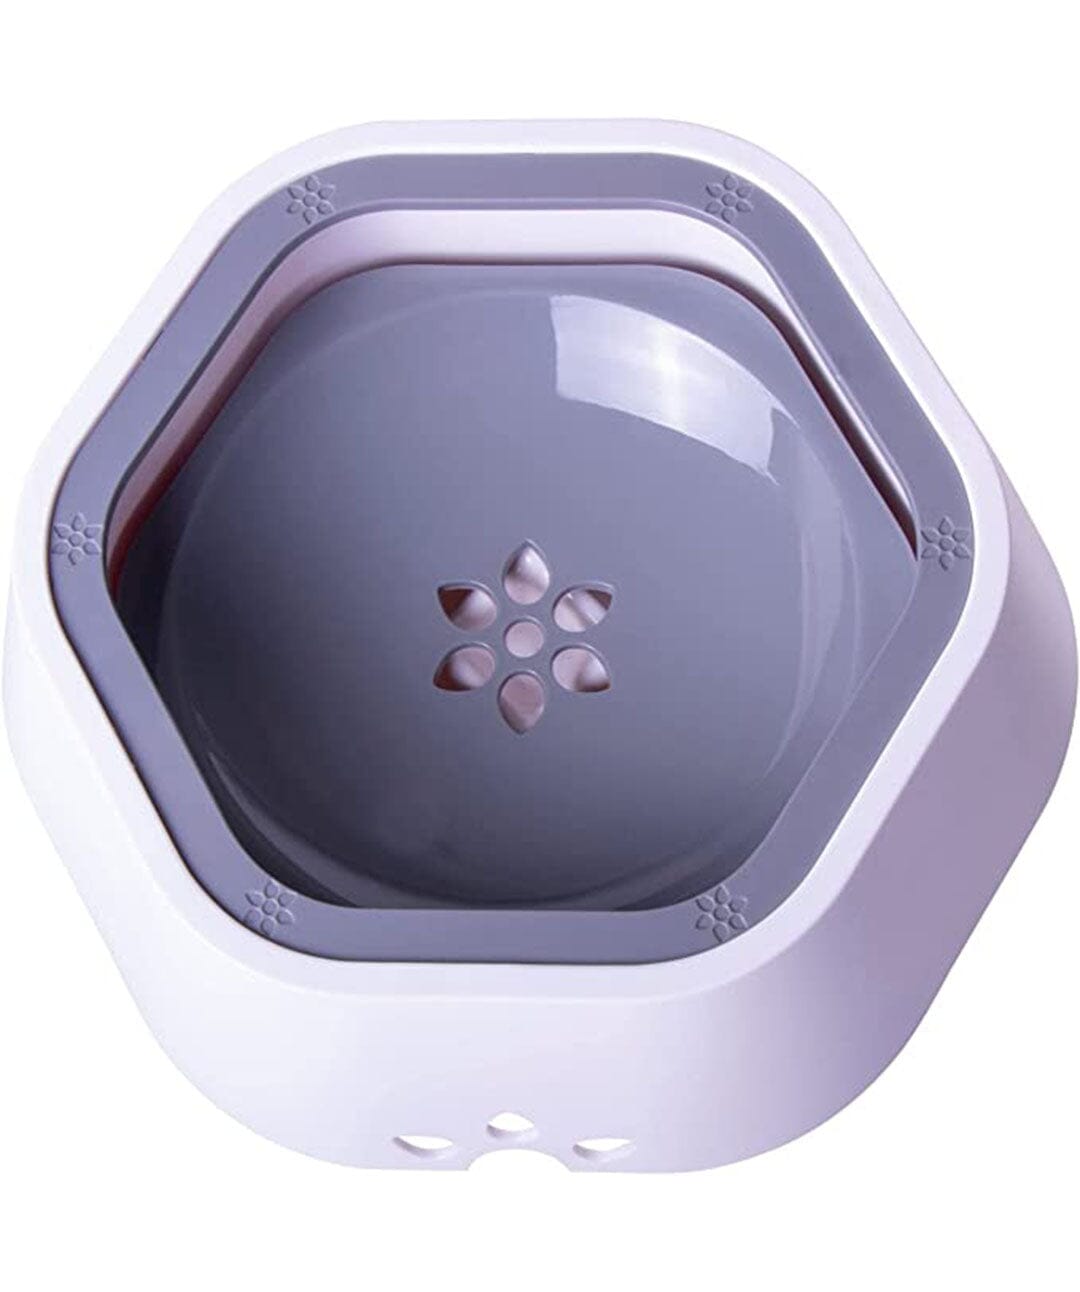 Everspill Anti-Spill Pet Water Bowl Water Bowl Rover 